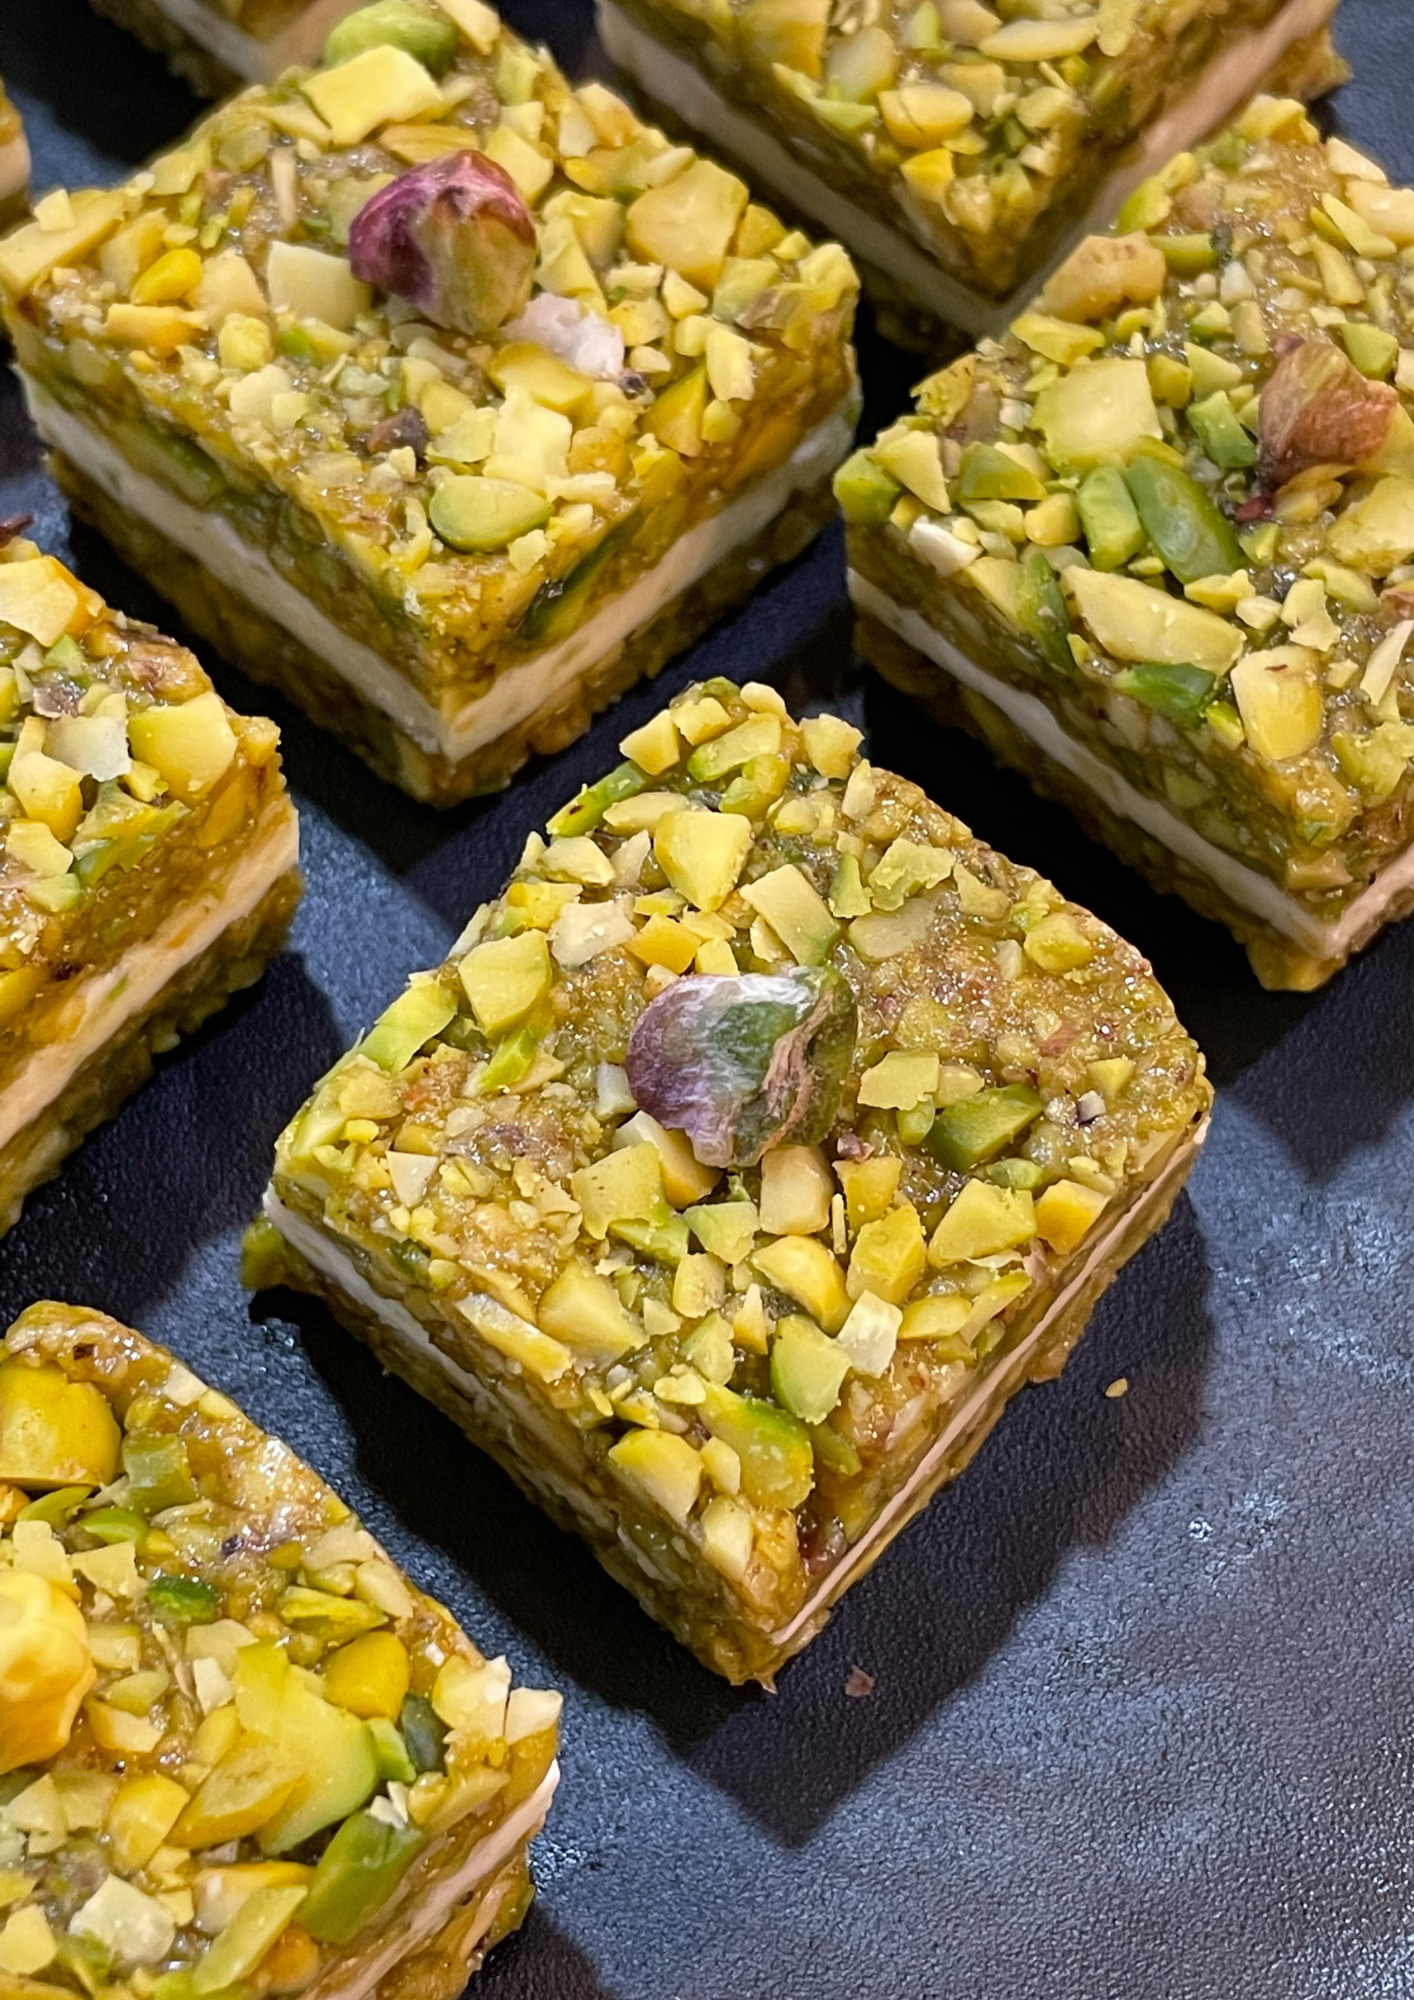 Pistachio crumbles sandwiched with white chocolate  - 250gms